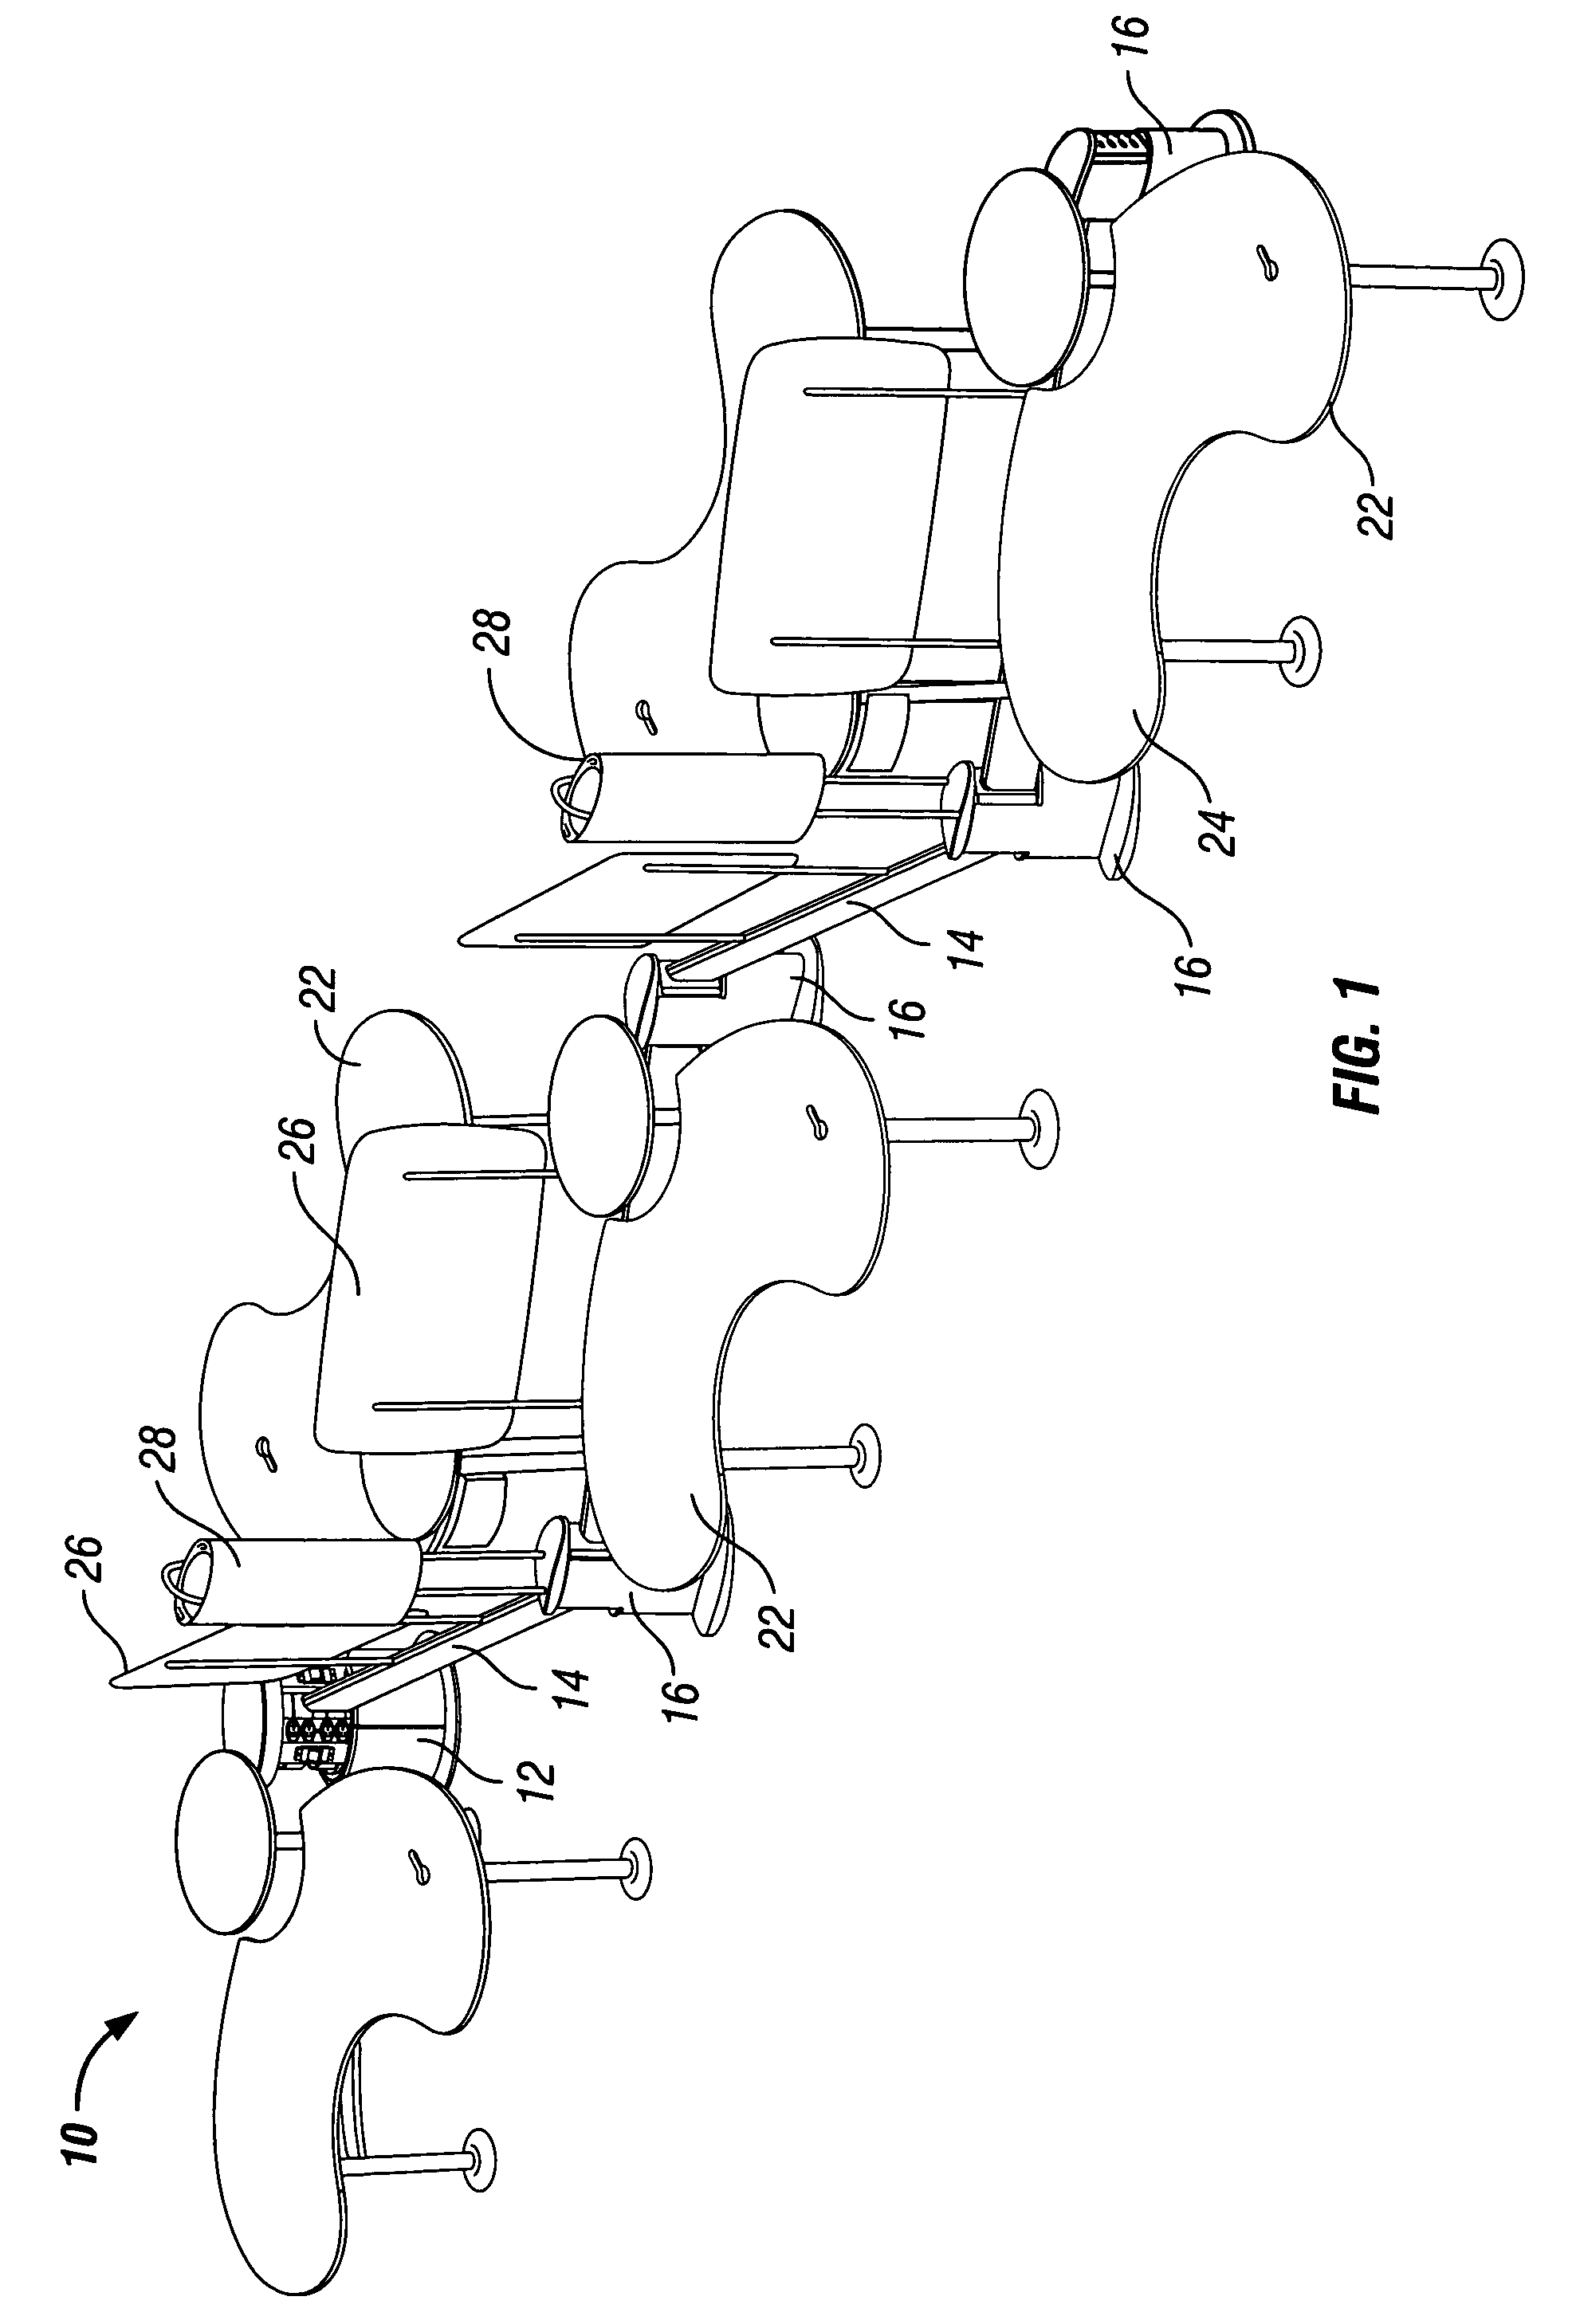 Modular system of power and data delivery components and method of setting up and utilizing the components in a work space environment